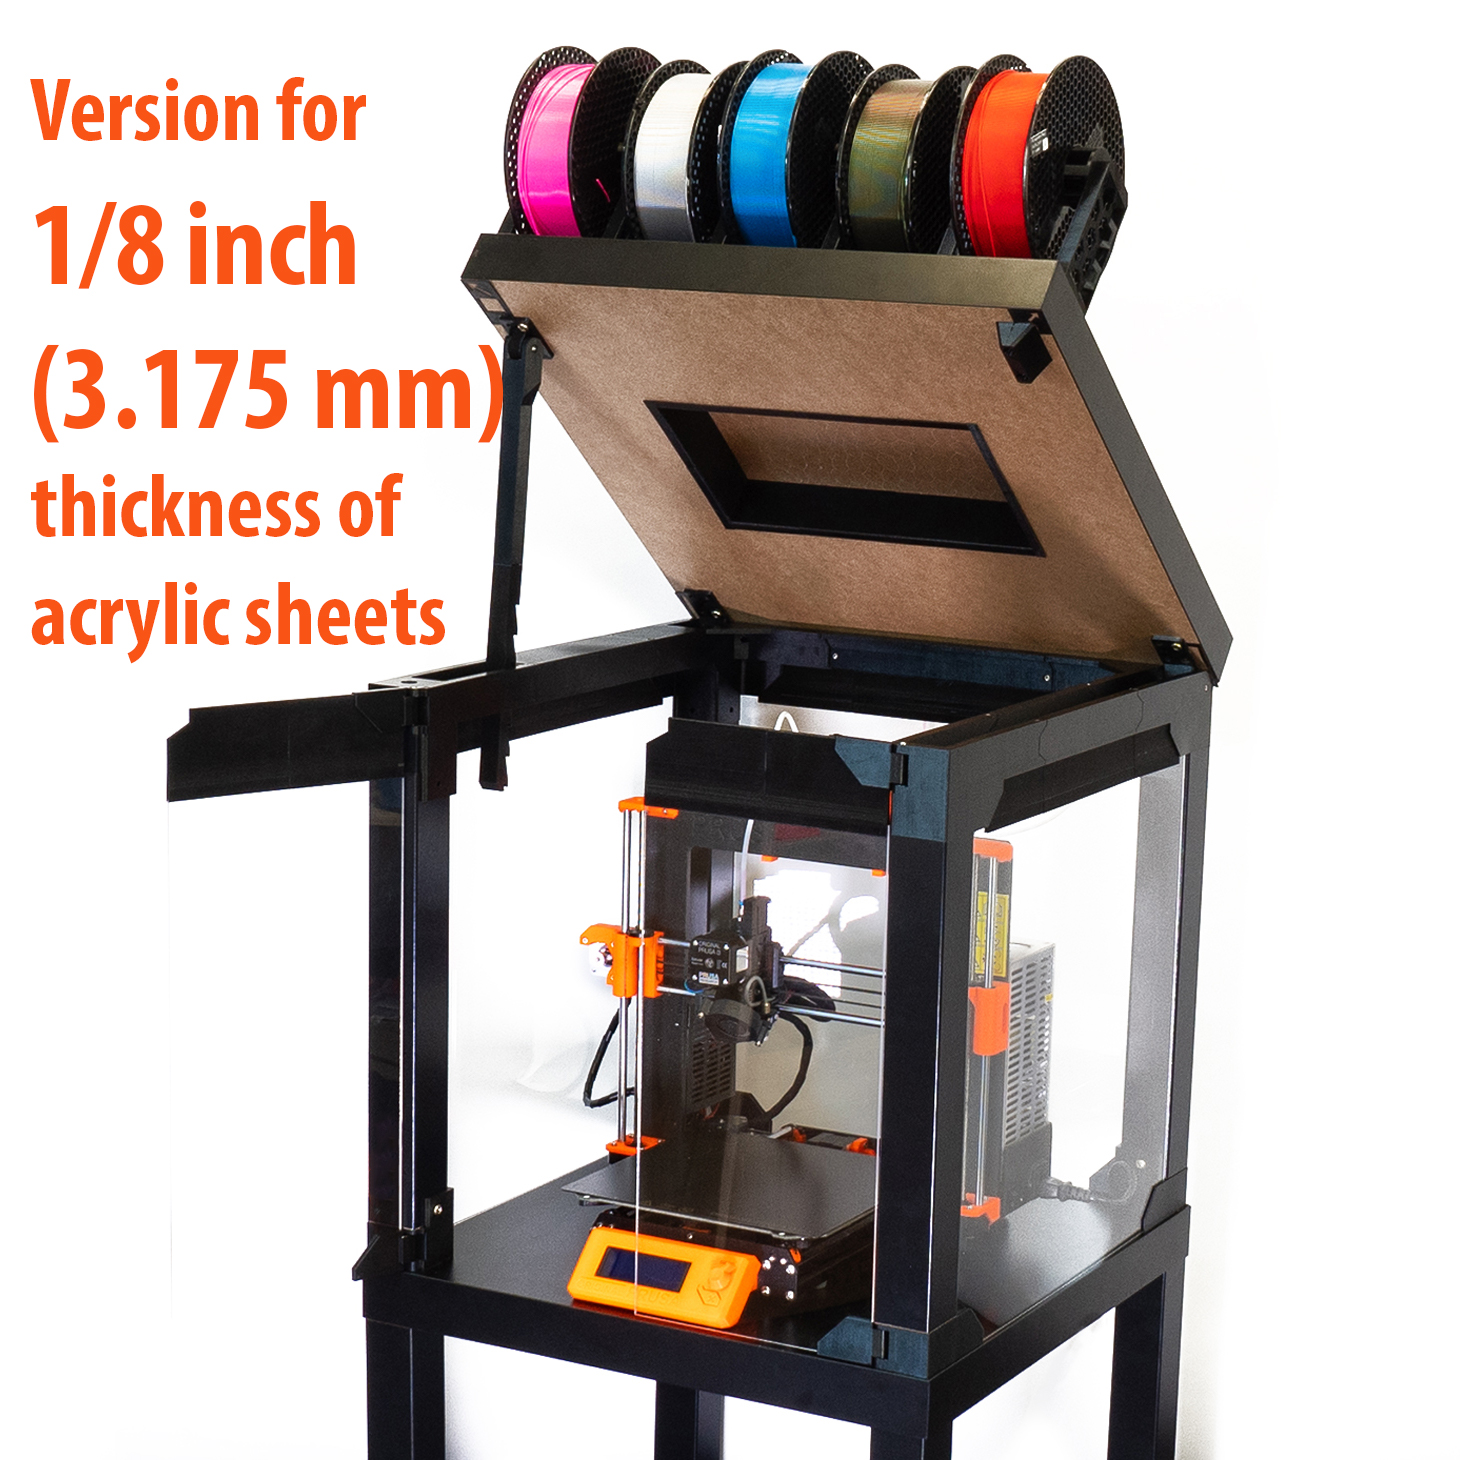 Prusa Printer Enclosure v2 – with MMU2S support - 0.125 inches acrylic version